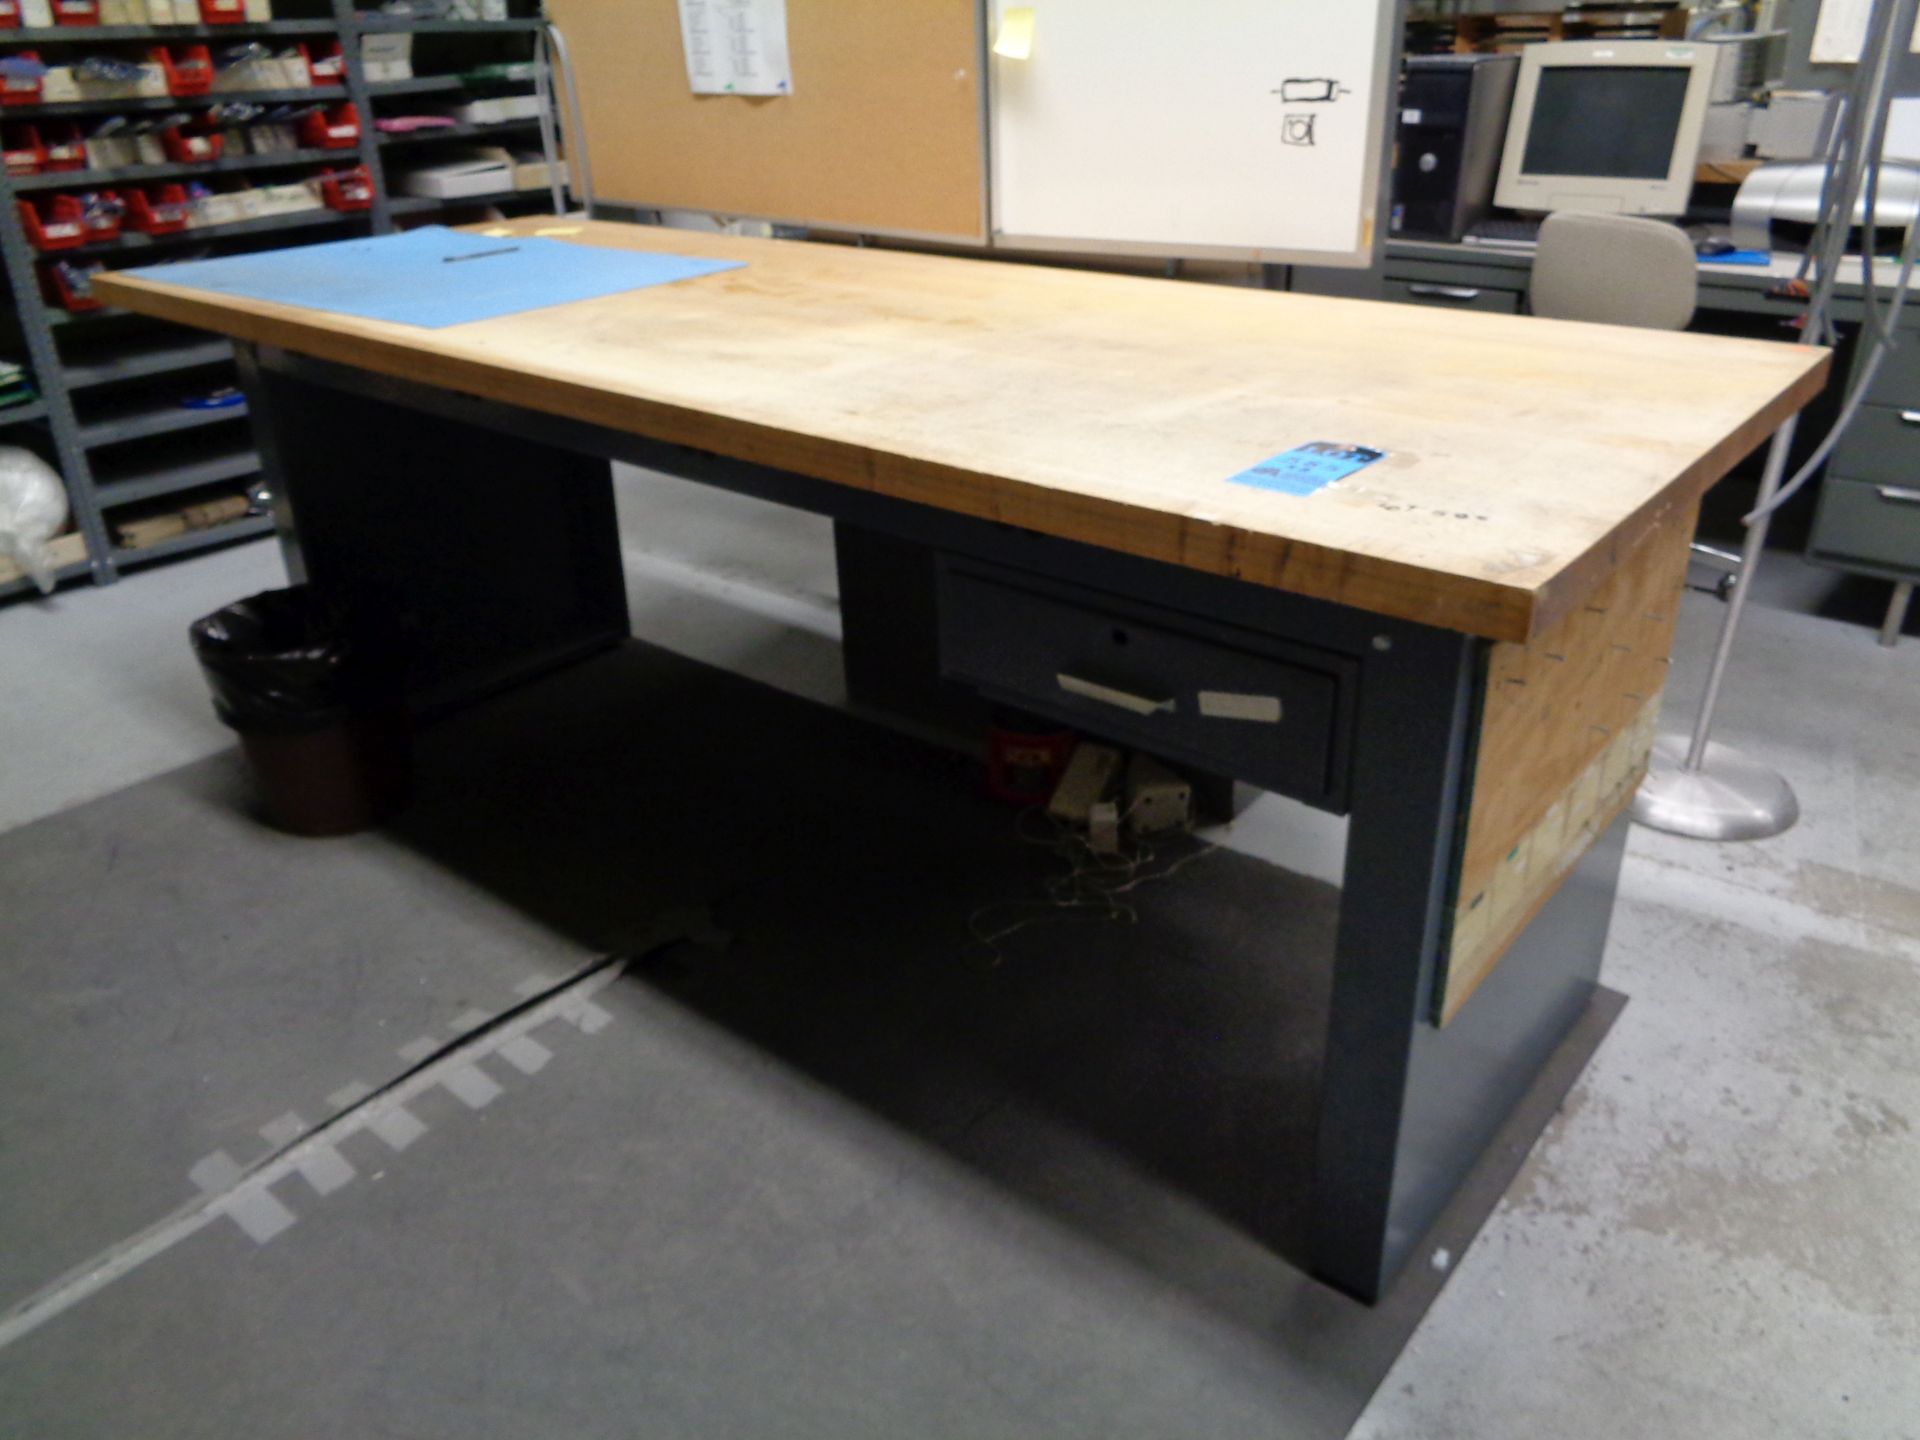 36" X 96" X 36" HIGH STEEL FRAME MAPLE TOP WORK TABLES